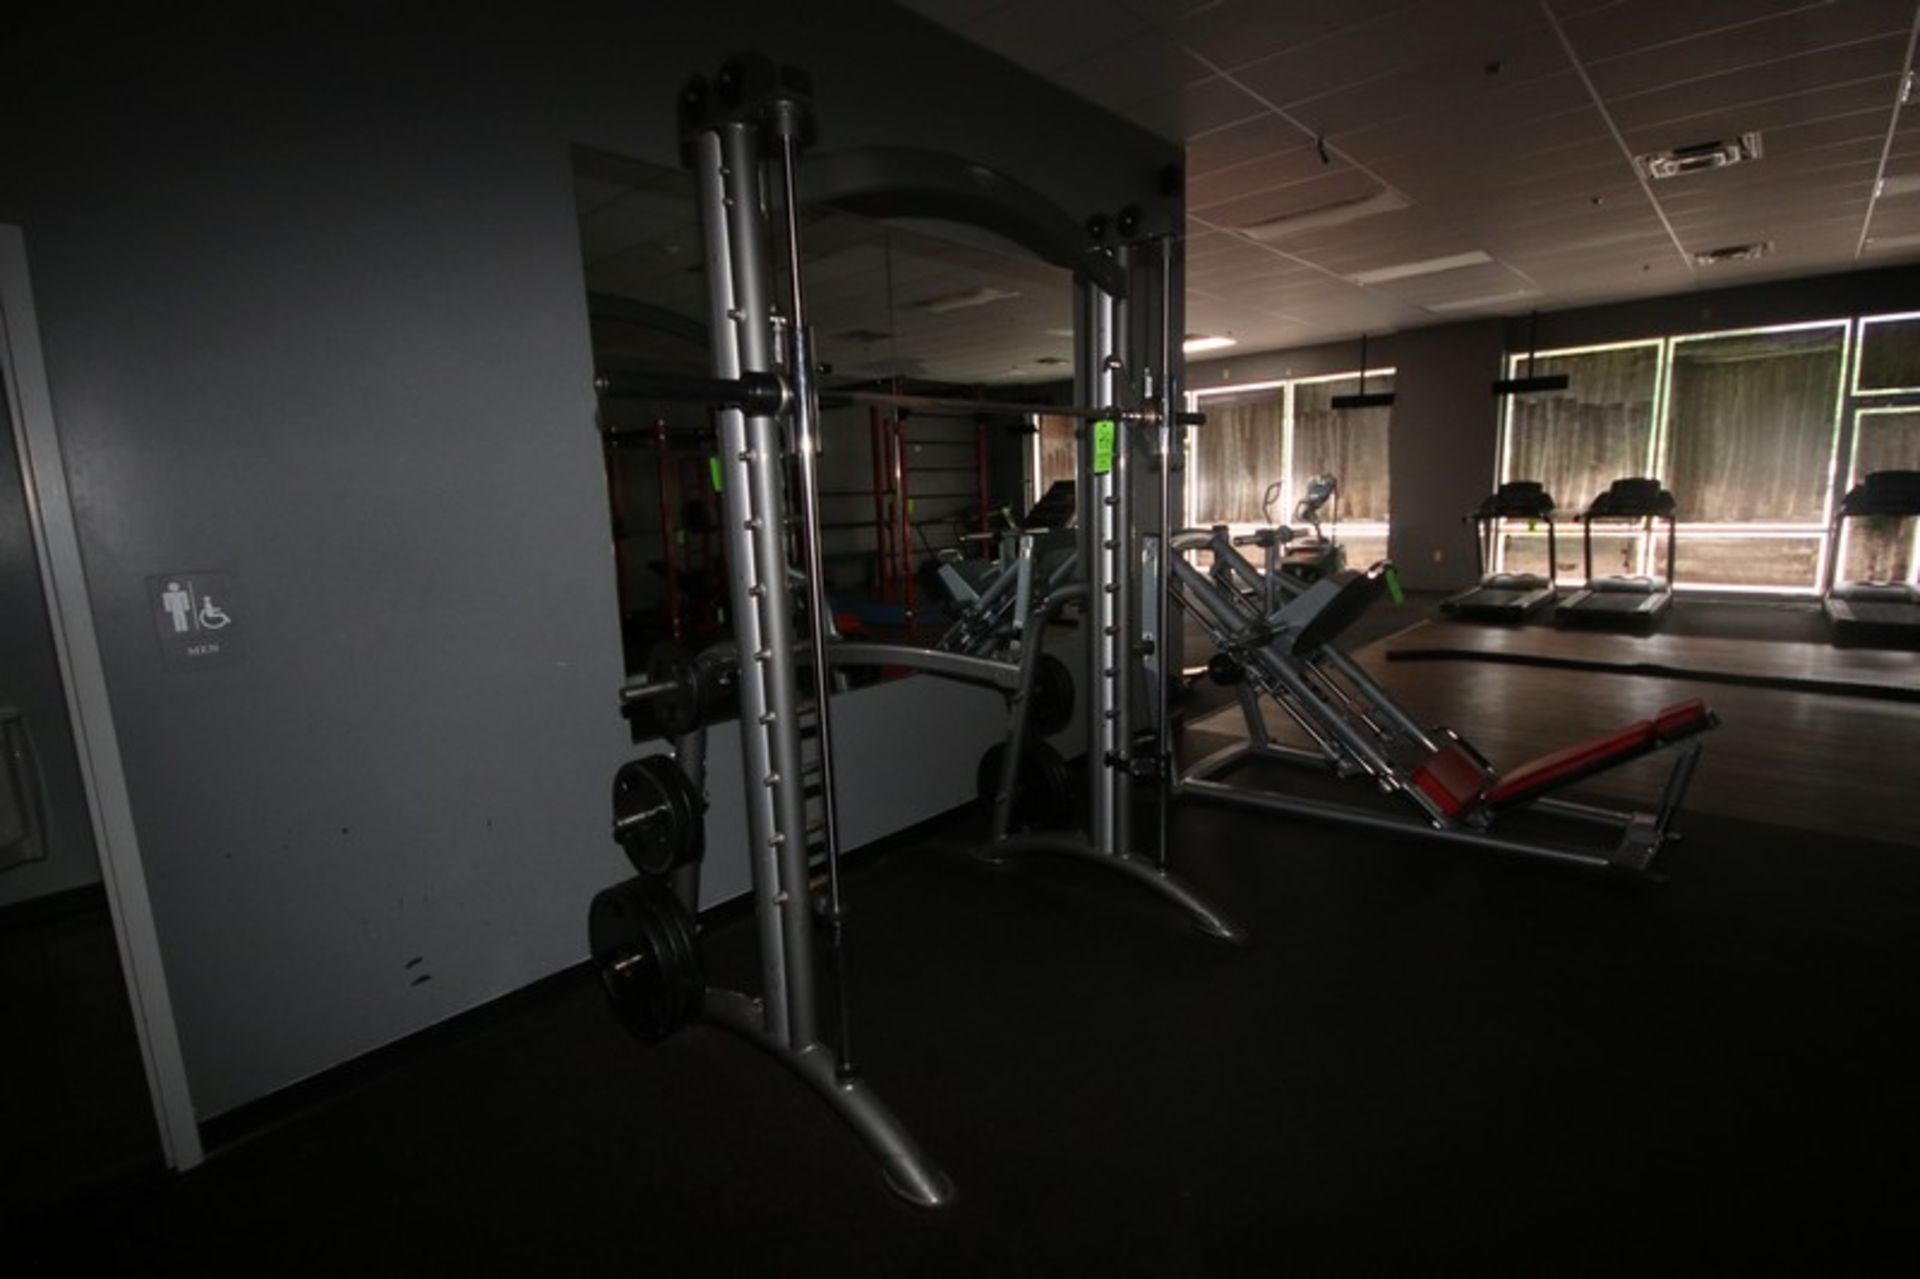 Matrix Smith Press Machine, with Some Weight Plates, Overall Dims.: Aprox. 90" L x 59" W x 96" H (